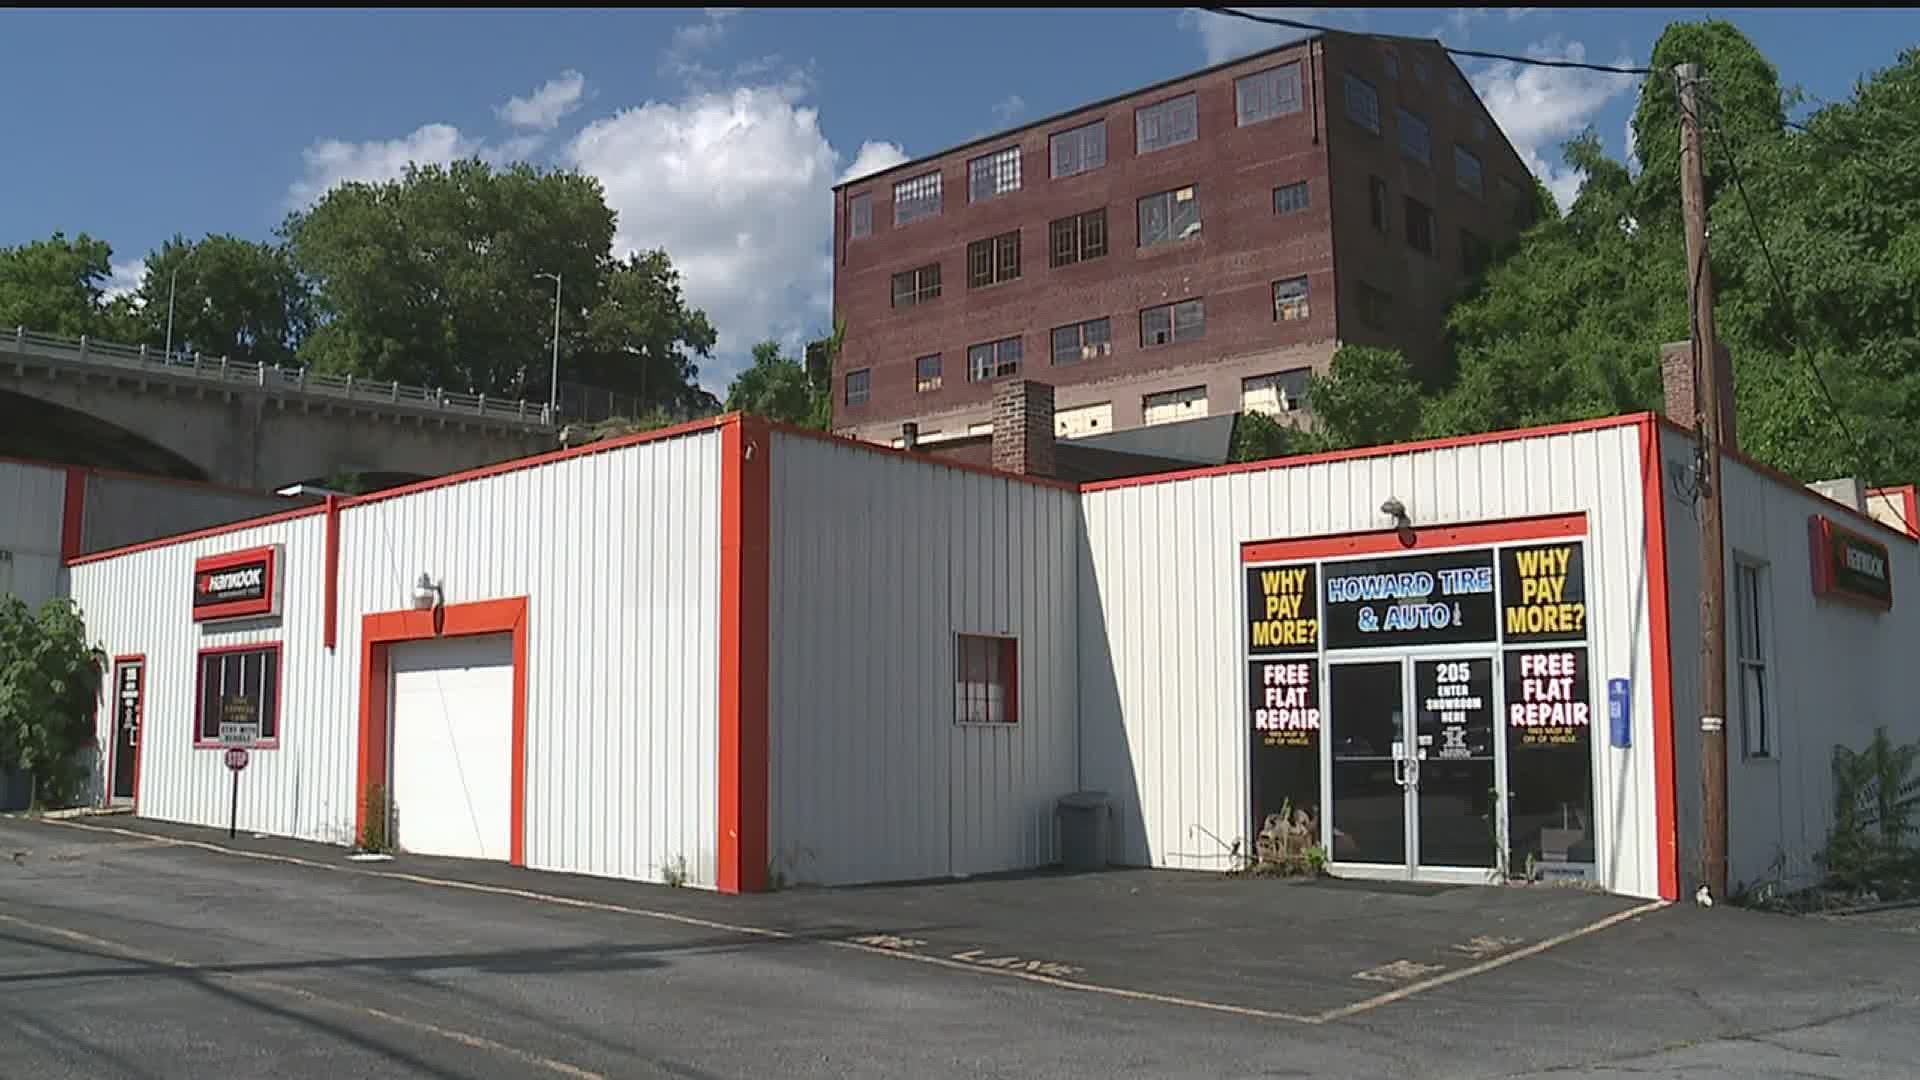 A 107-year-old wall collapsed onto Howard Tire and Auto on May 5, 2016, forcing it to close. Its owner, Howard Henry, said the event also collapsed his life.